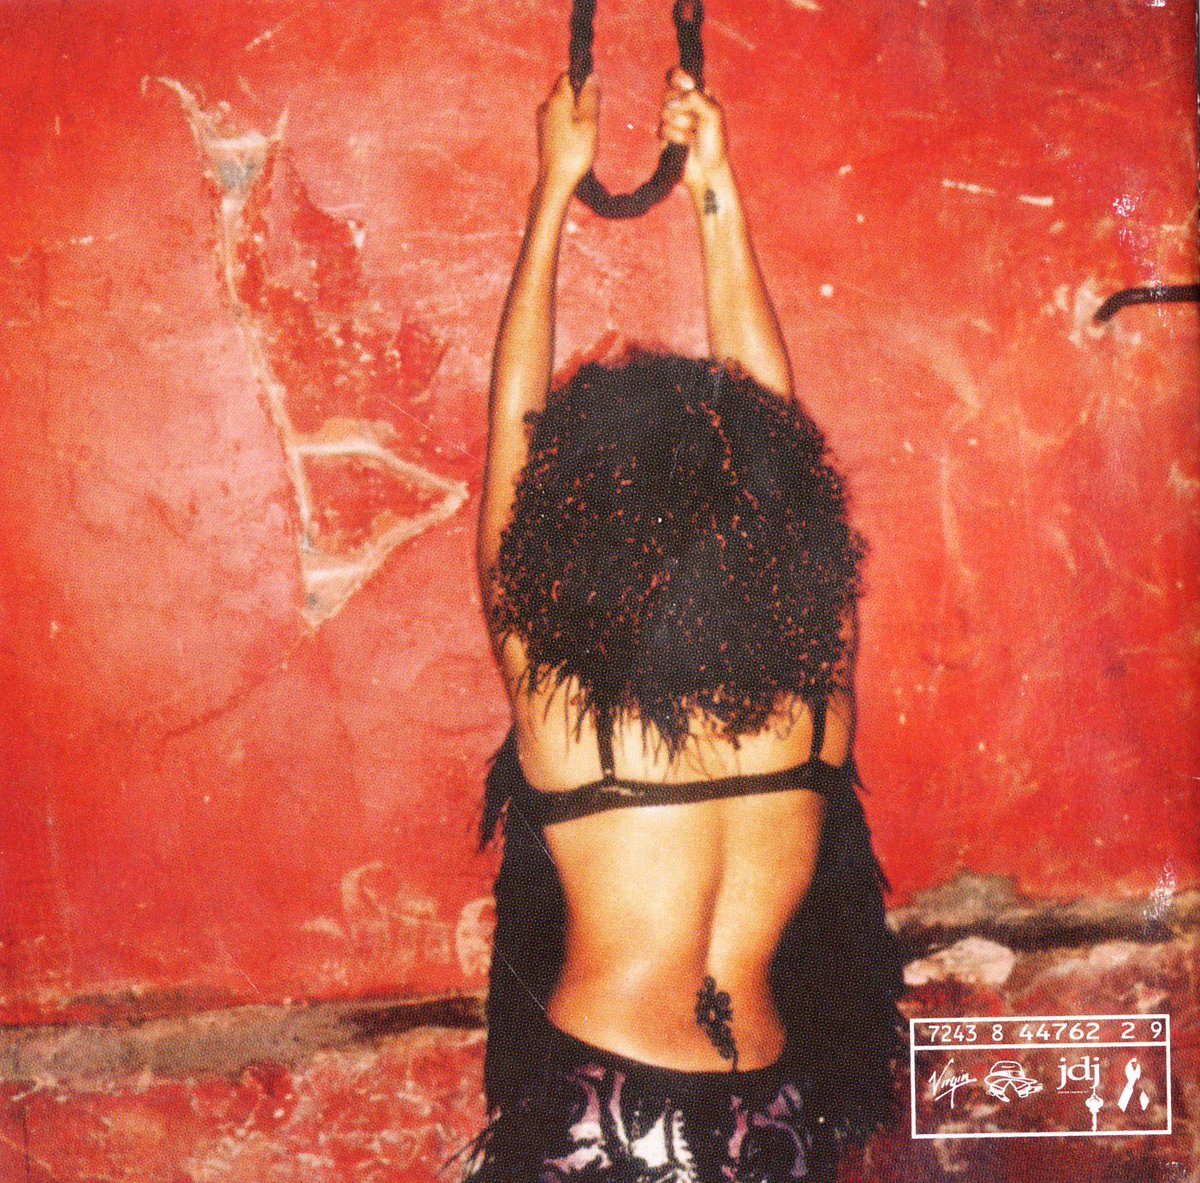 The album's artwork was photographed primarily by Ellen Von Unwerth with a few shots handled by Mario Testino. The risque images gained media attention for Janet's nipple piercing and themes of bondage. Simply iconic.